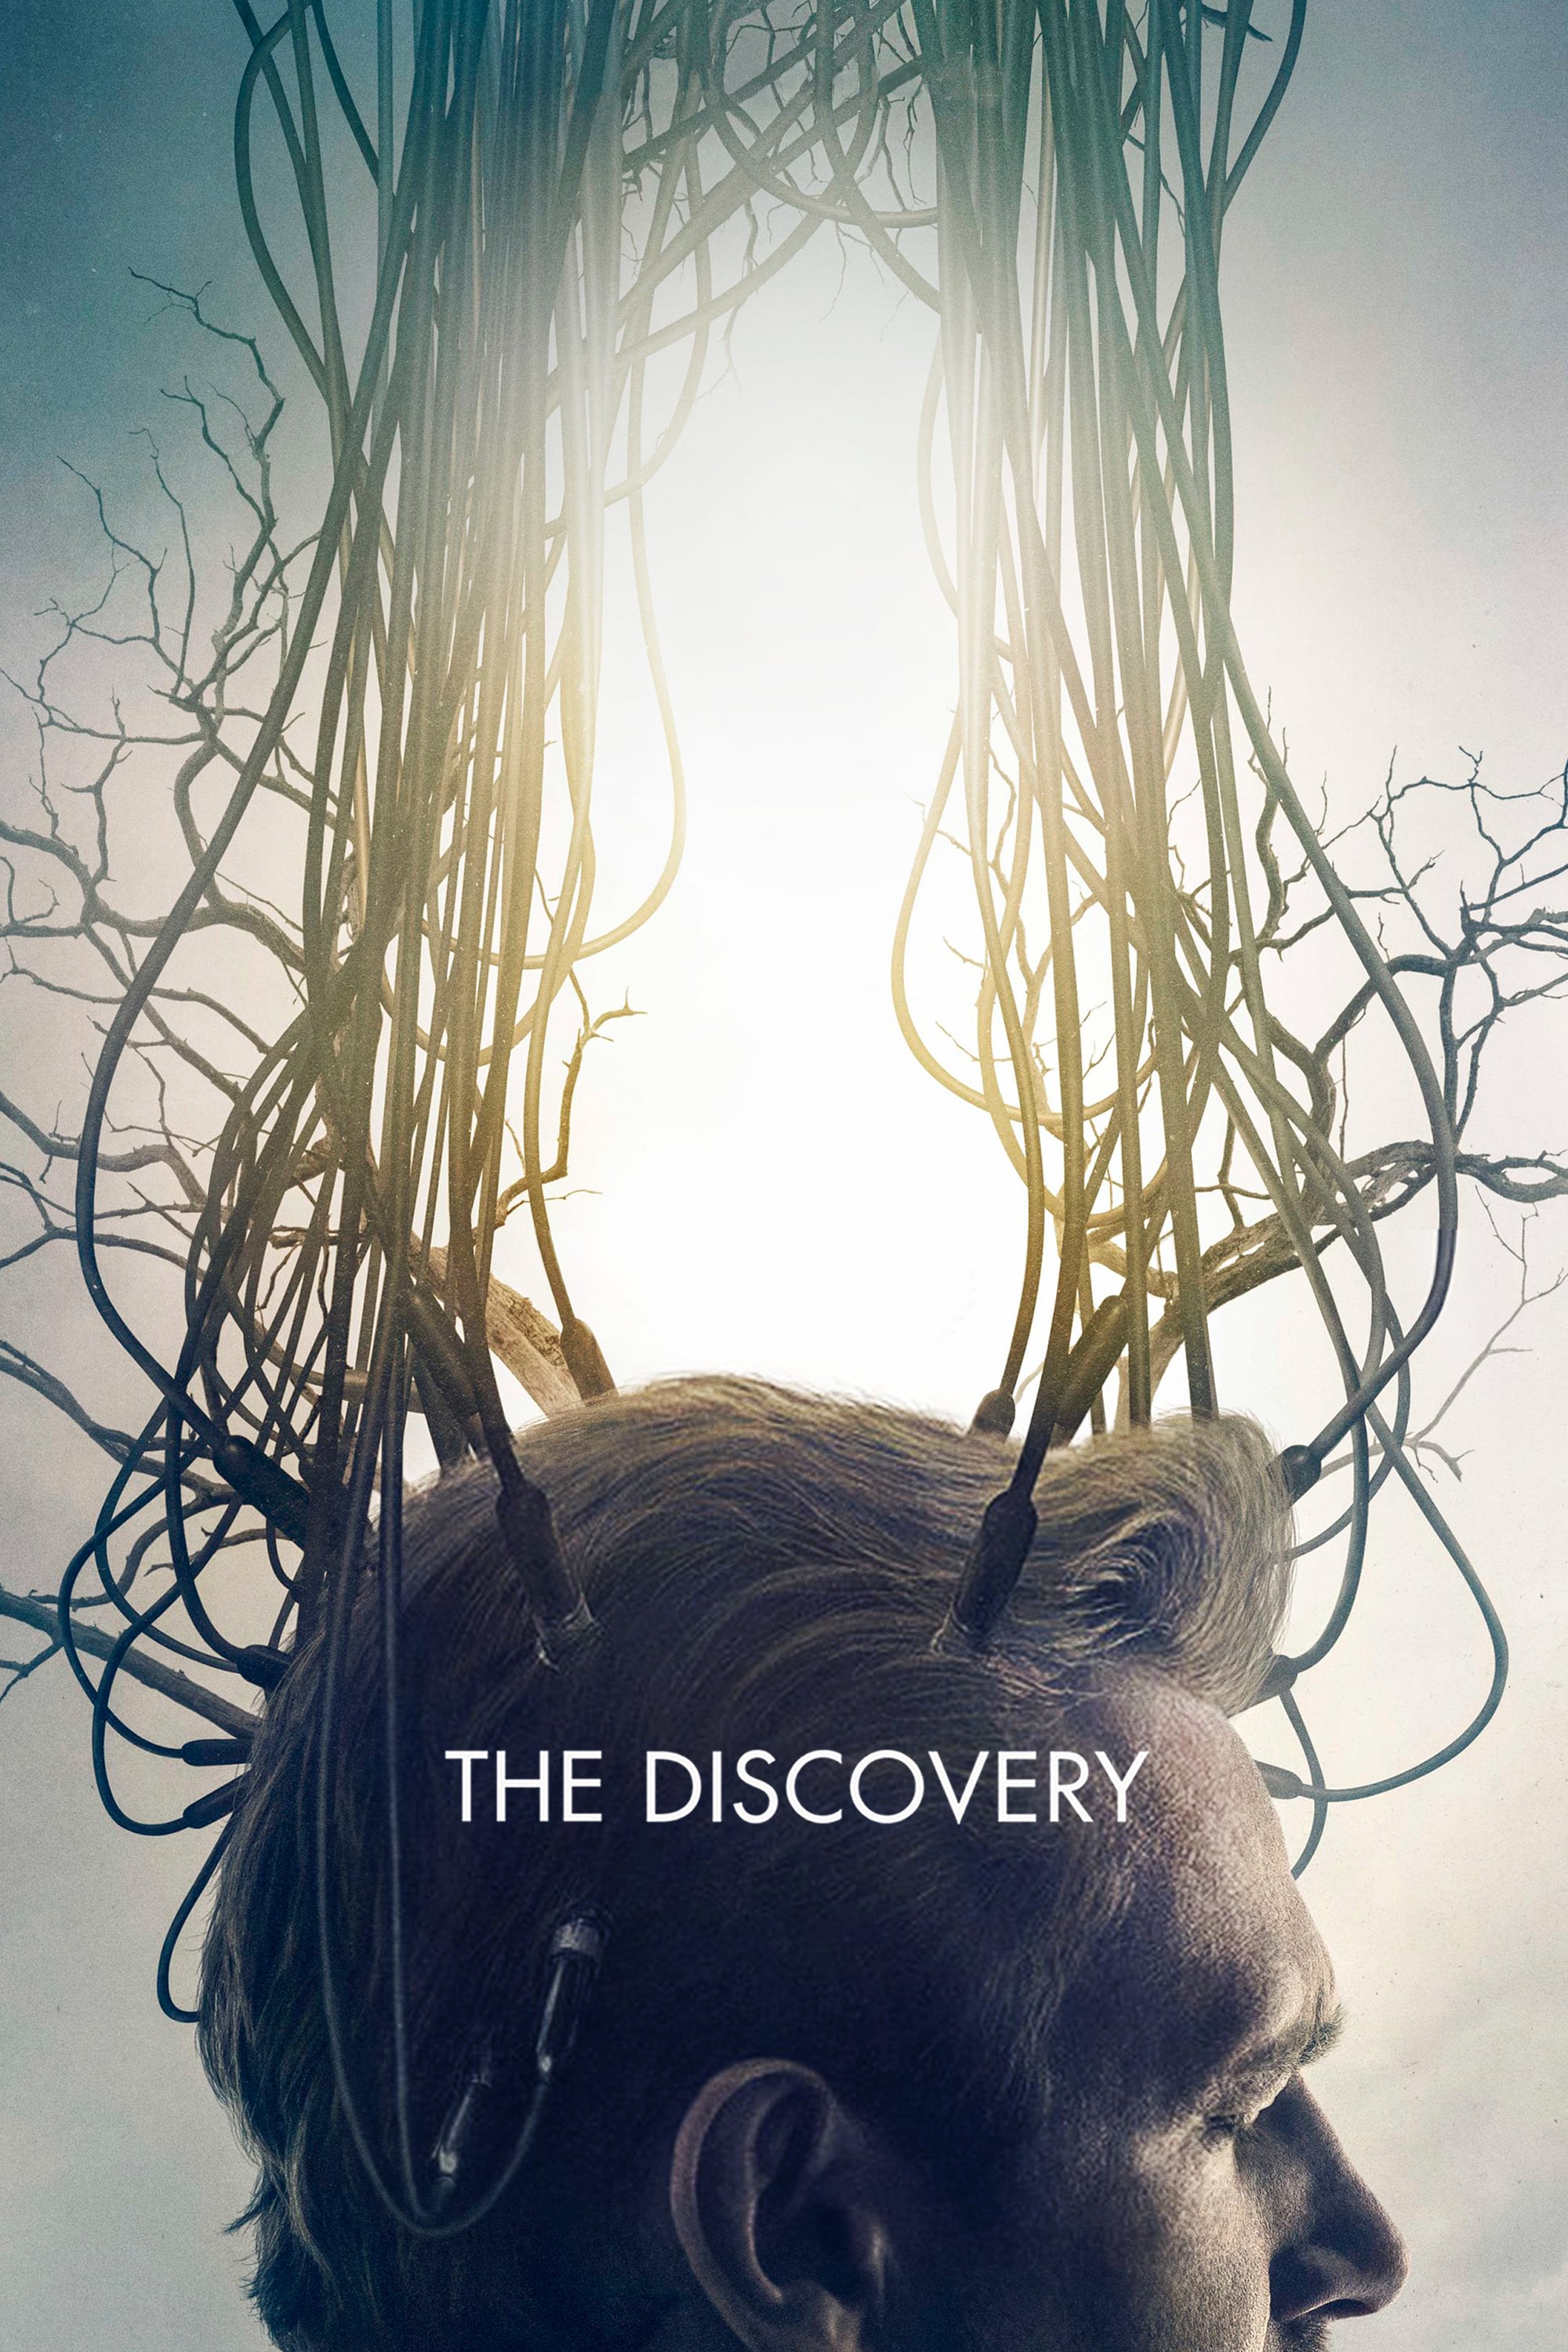 Plakat von "The Discovery"